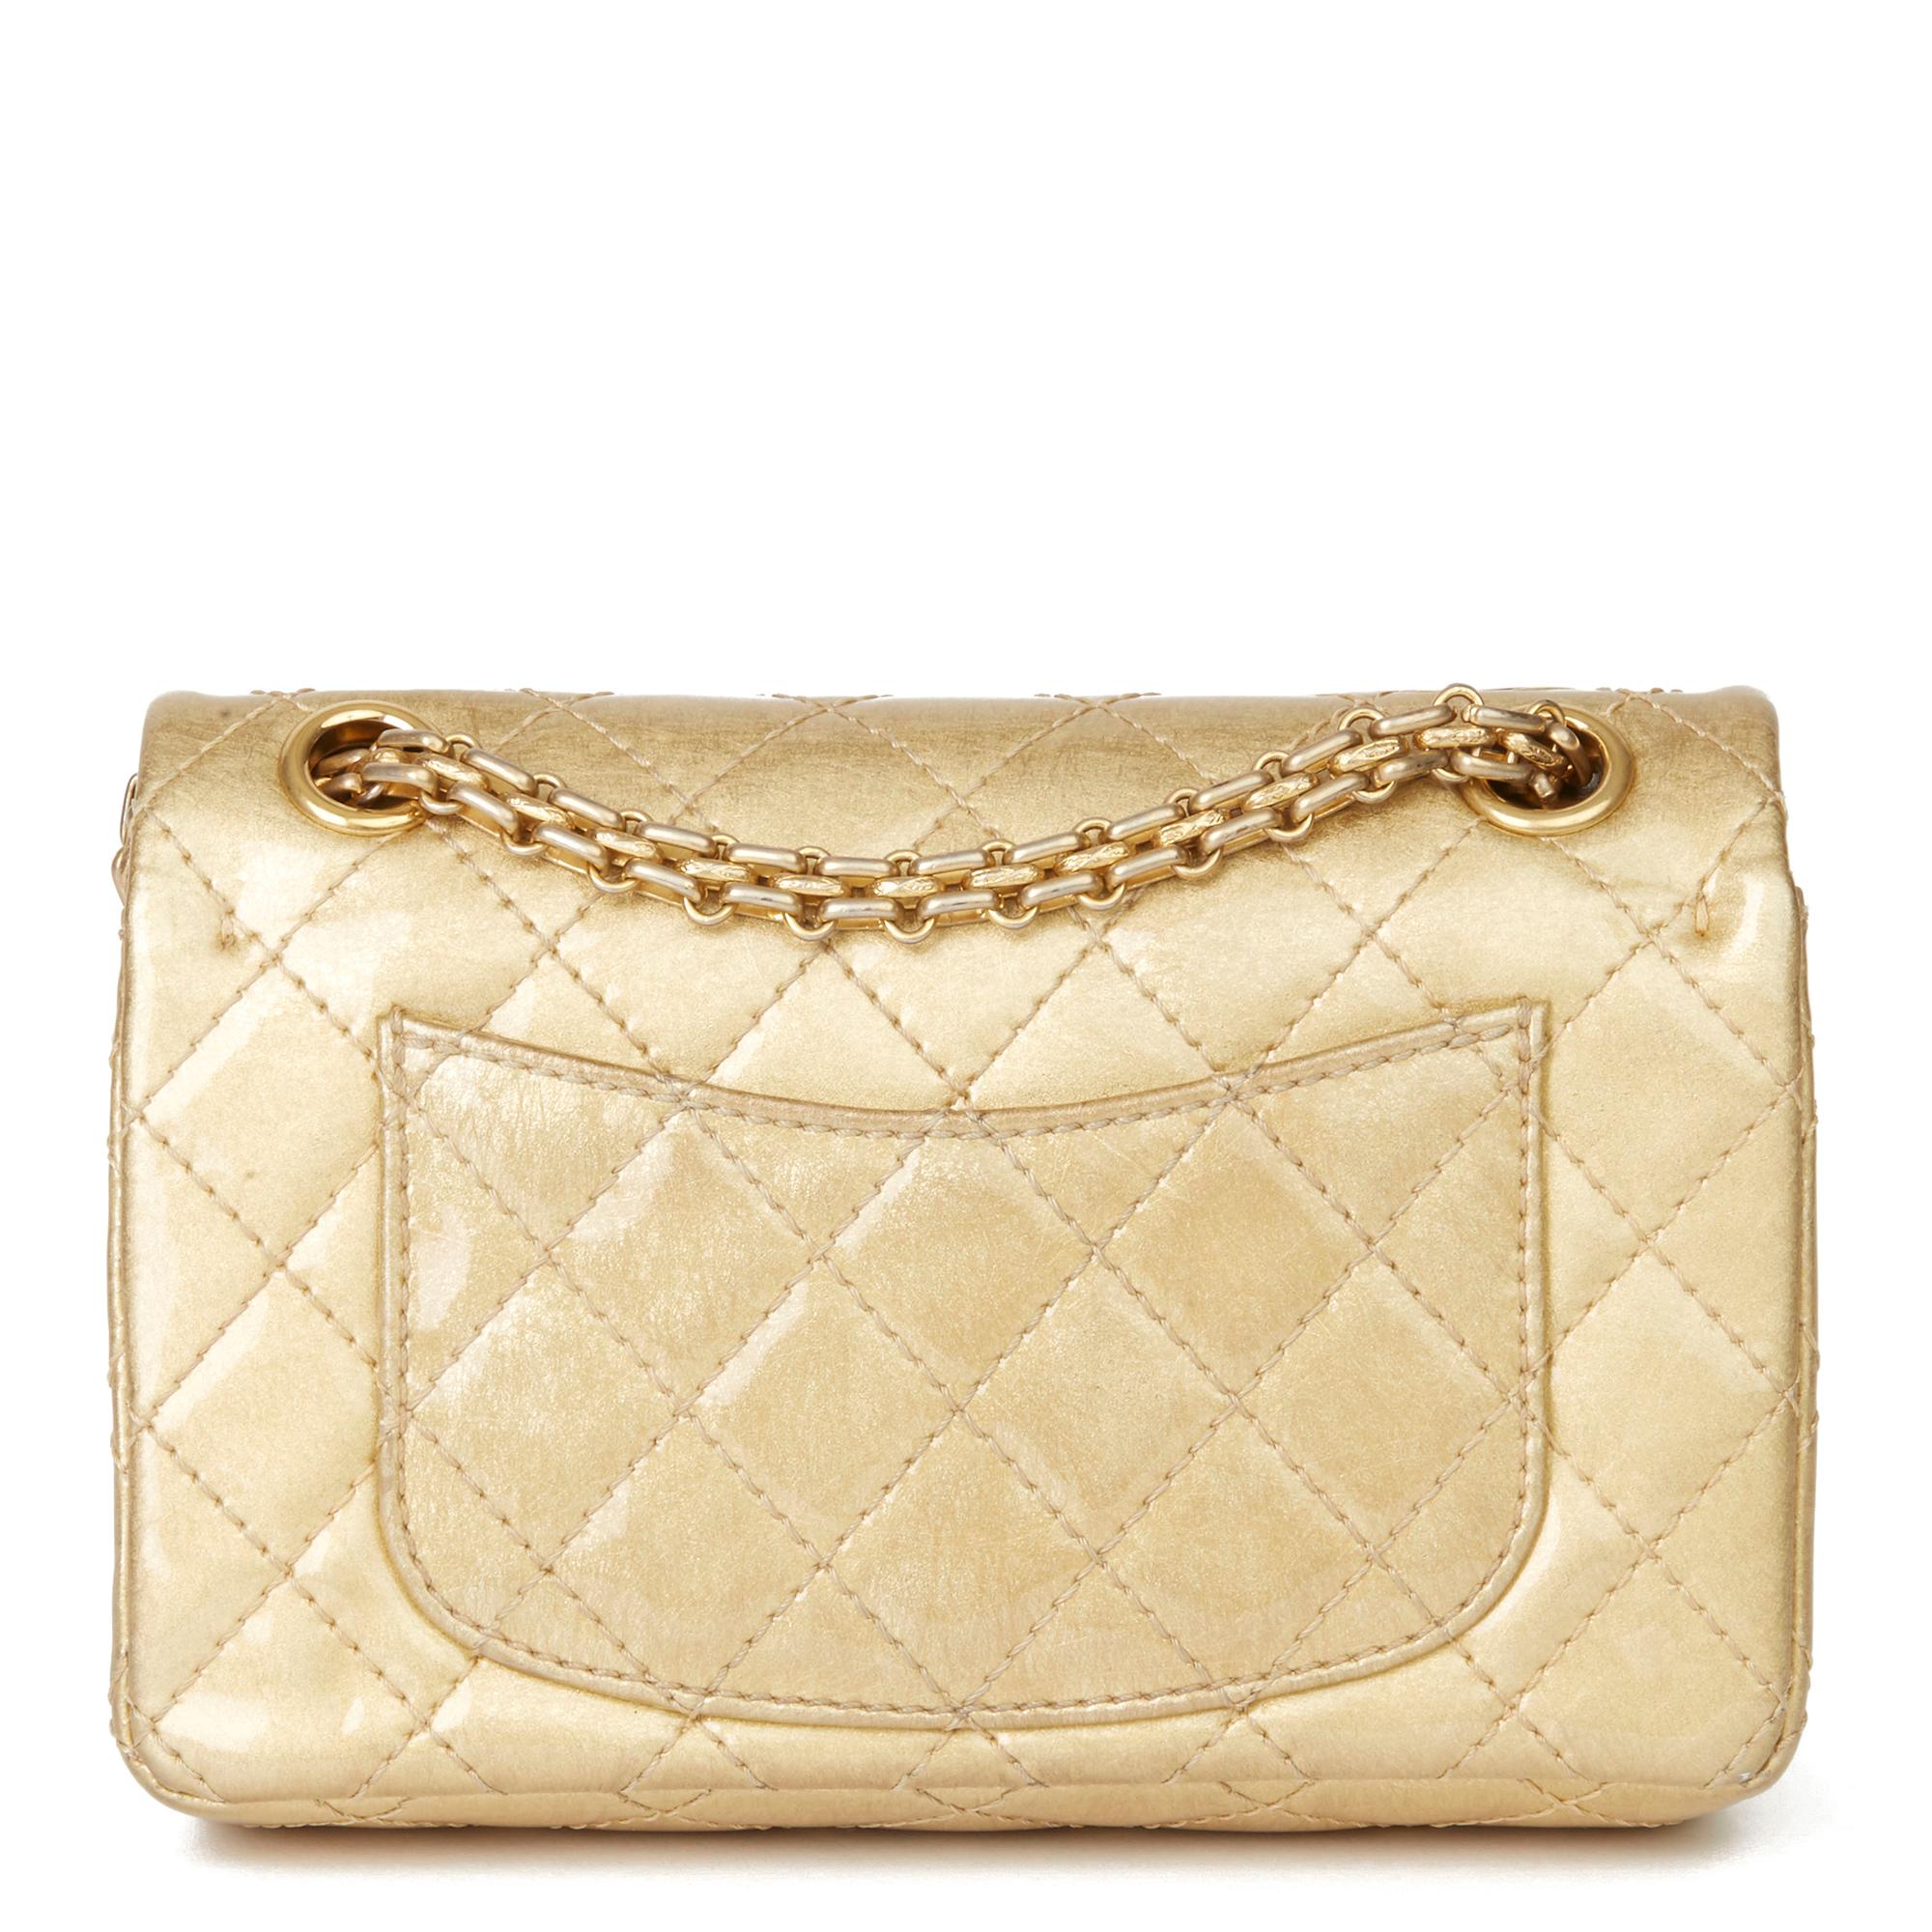 Women's 2010 Chanel Gold Quilted Metallic Aged Patent Leather Reissue Double Flap Bag